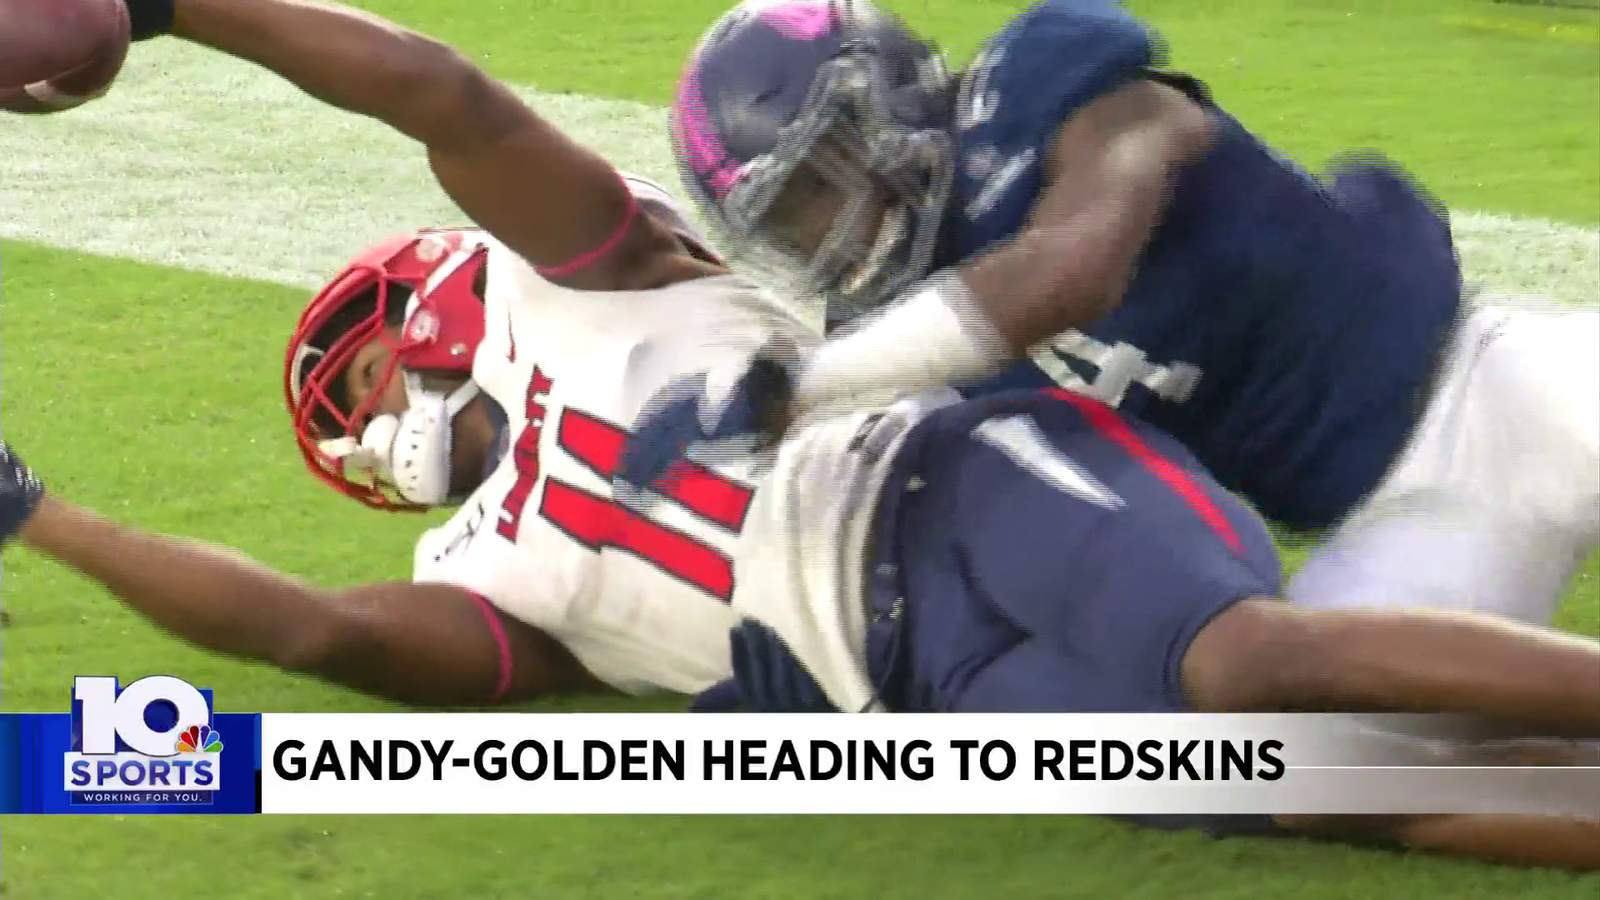 The Washington Redskins take Liberty WR Antonio Gandy-Golden in 4th round, 142nd overall